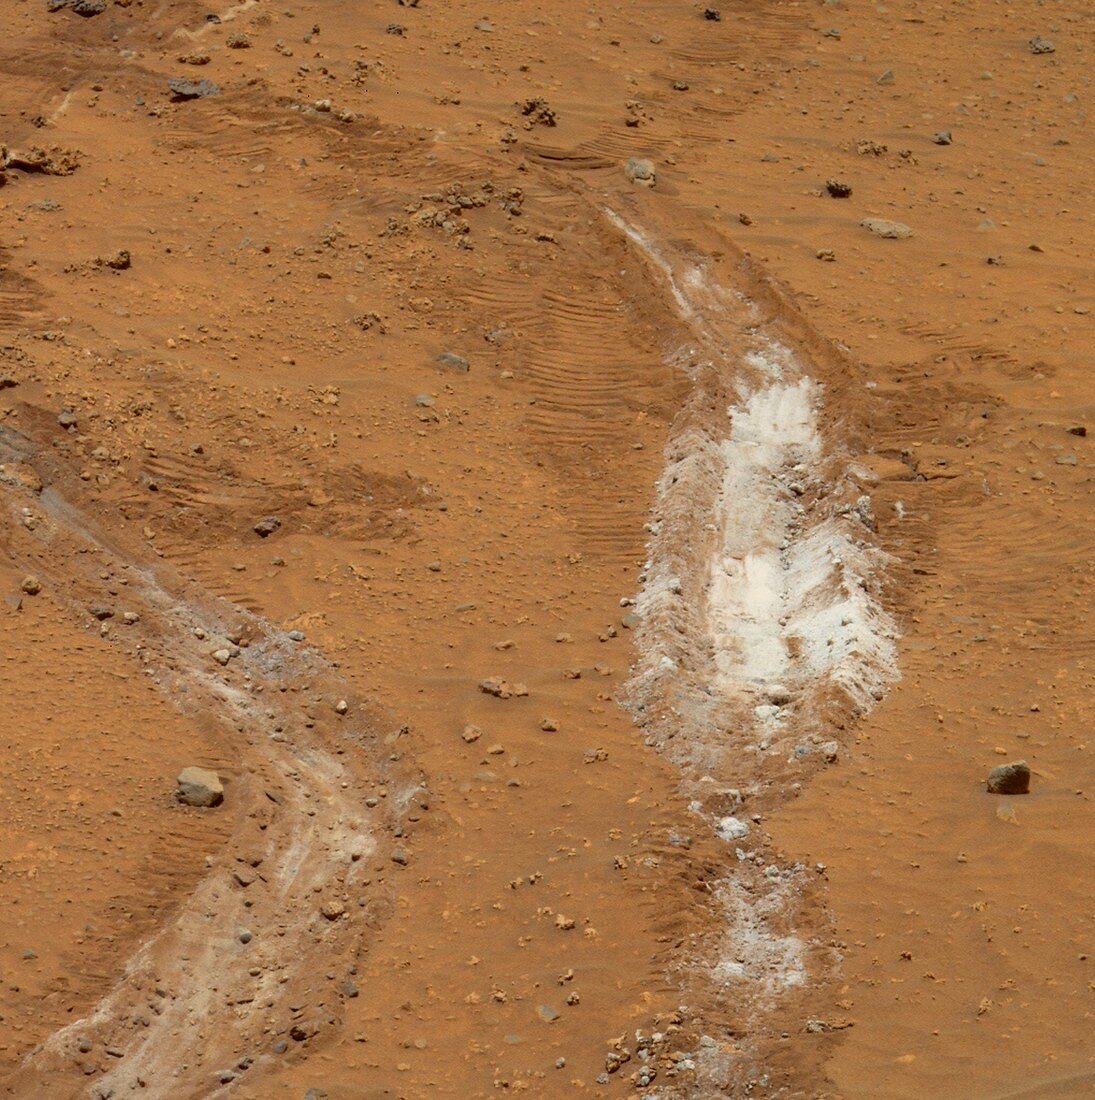 Silica-rich soil on Mars,composite image